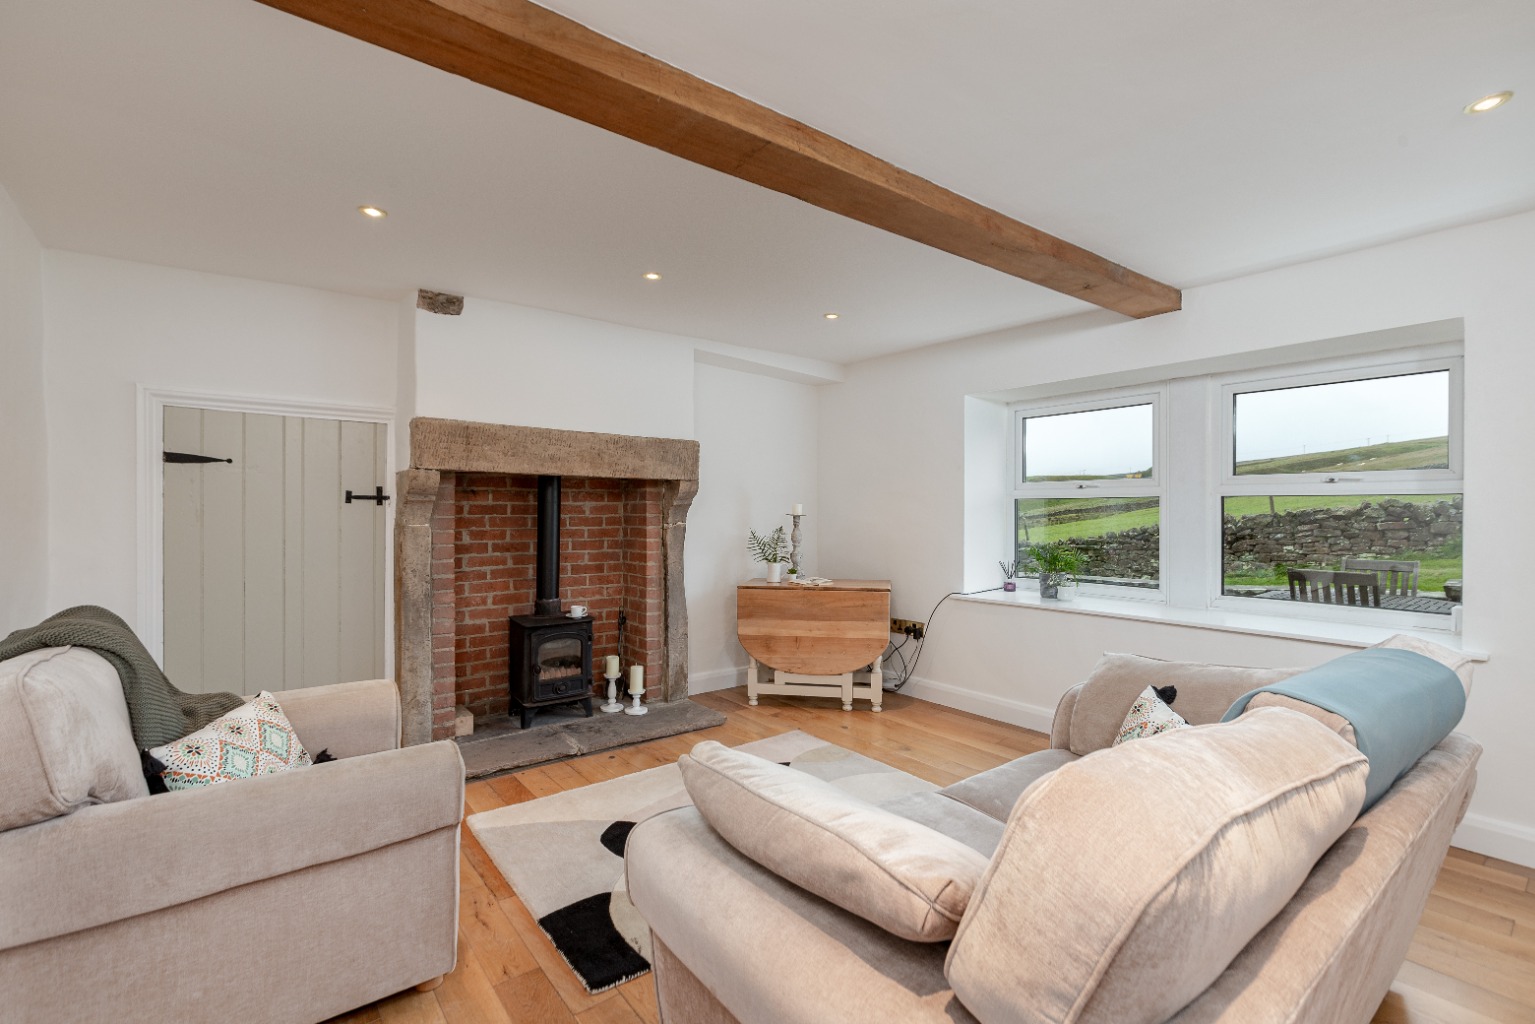 3 bed terraced house for sale in Low Level, North Yorkshire  - Property Image 3